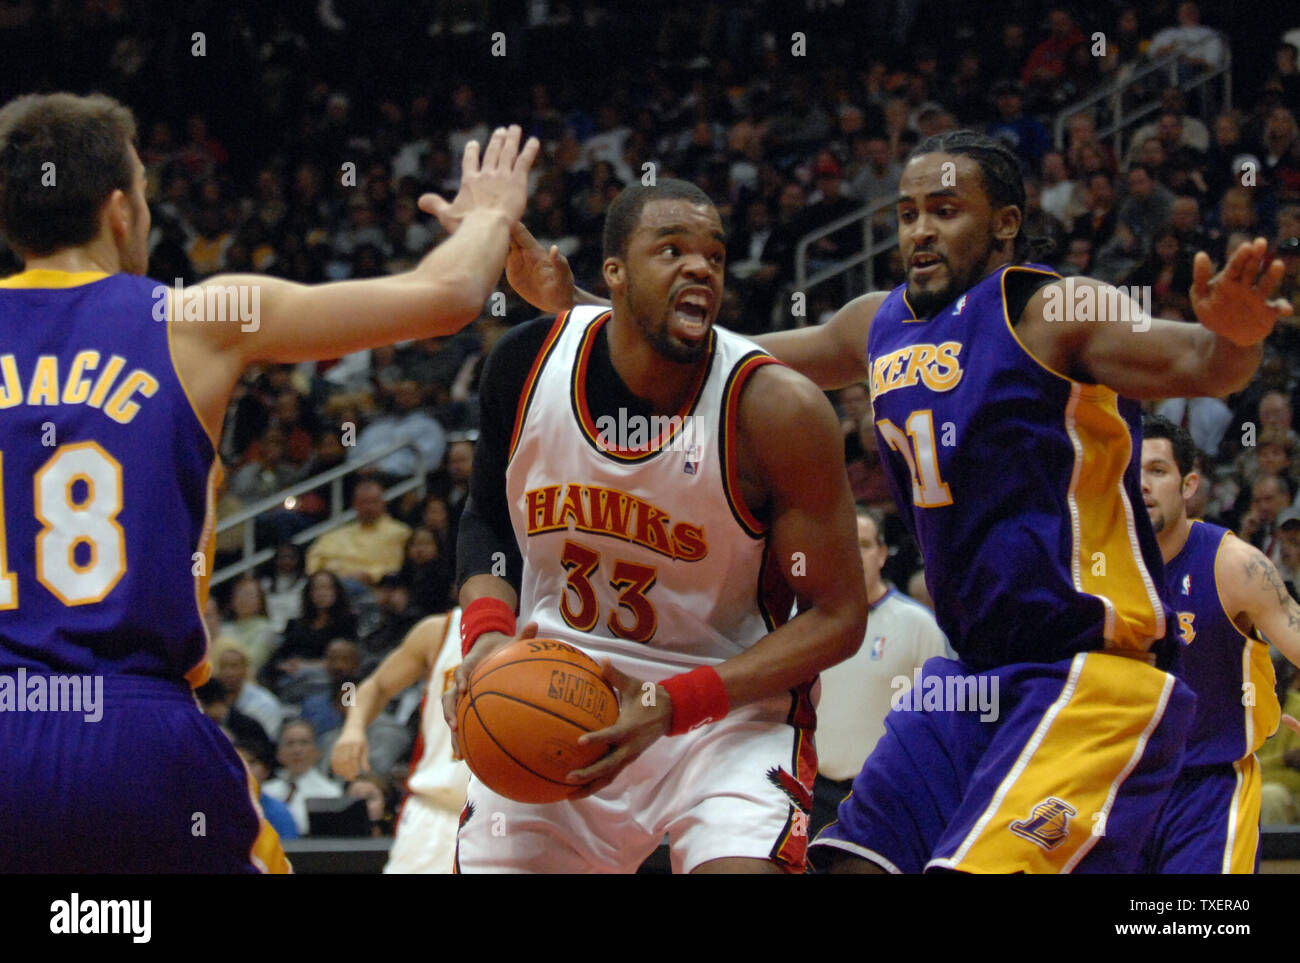 Atlanta Hawks Shelden Williams (33) looks toward his basket for a shot while guarded by Sasha Vujacic (18), of Slovenia, and Ronny Turiaf (21) of the Los Angeles Lakers in the second quarter at Philips Arena in Atlanta, February 5, 2007. (UPI Photo/John Dickerson) Stock Photo